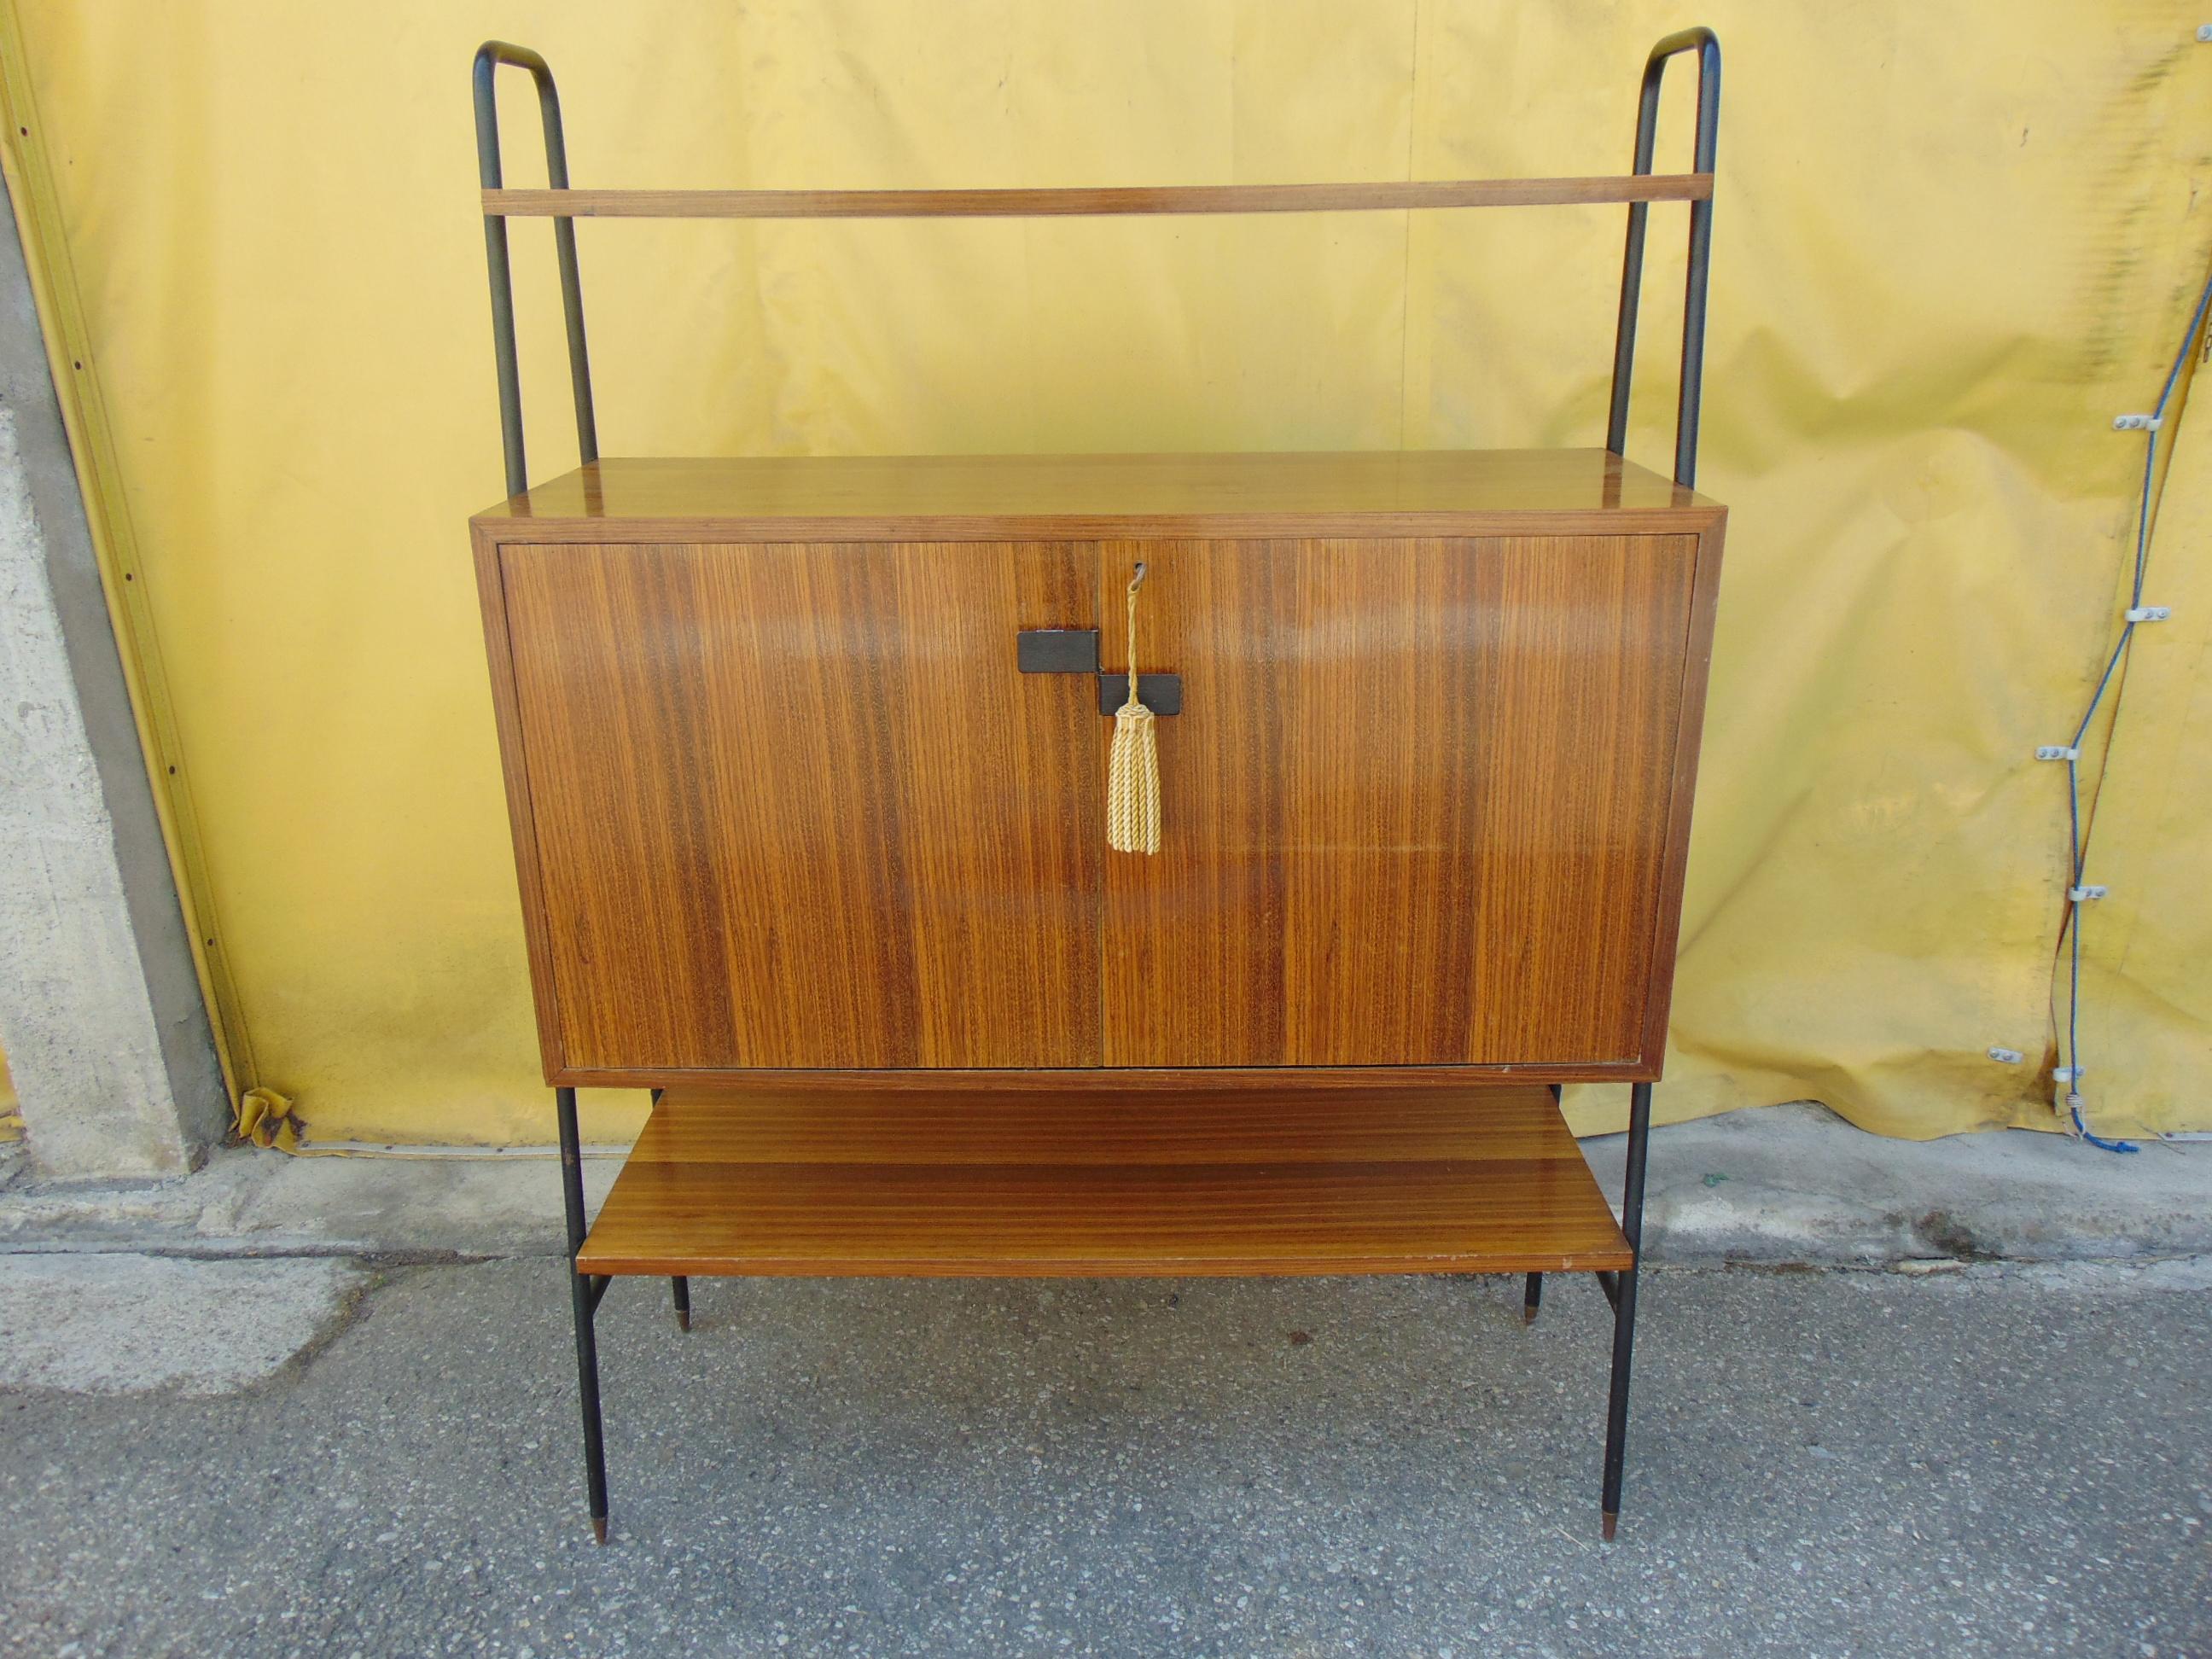 Midcentury Wooden and Black Metal Italian Wall Unit, 1950s For Sale 3